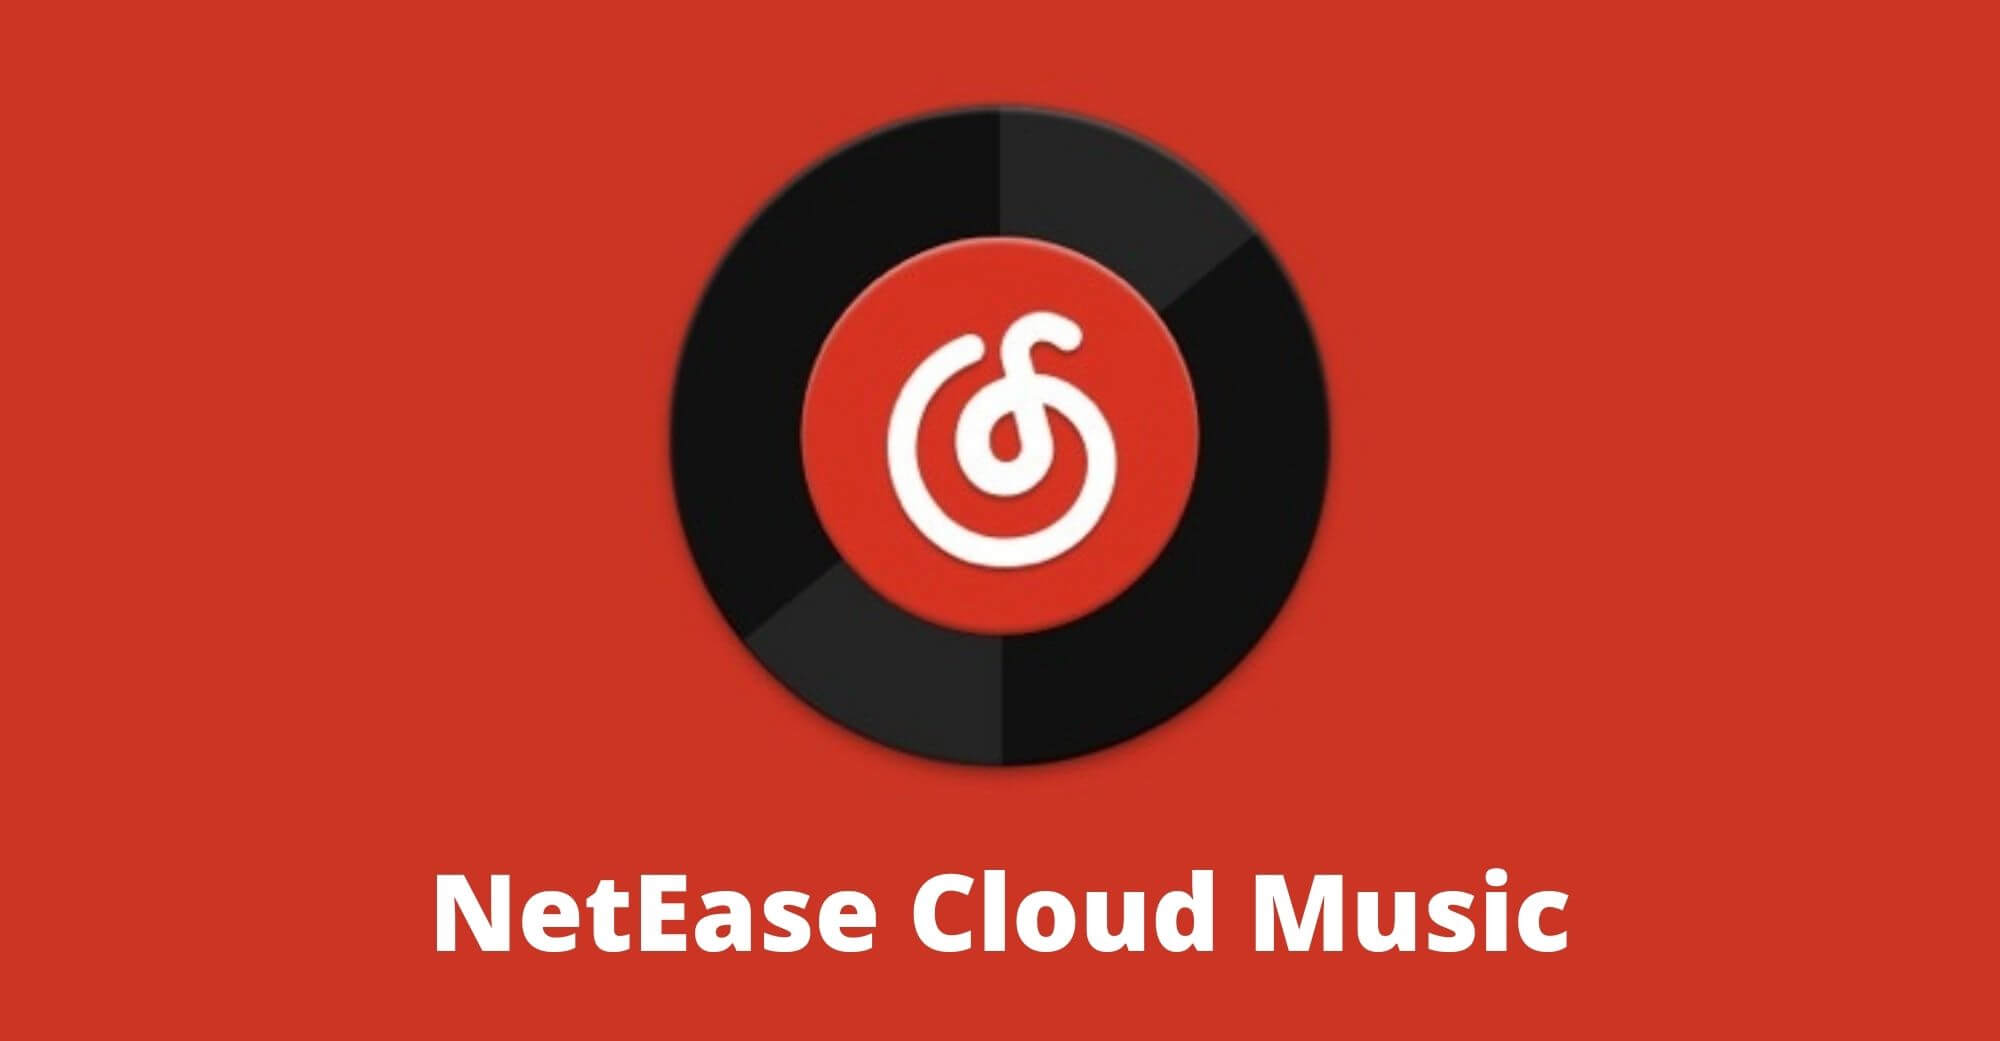 NetEase Cloud Music surpasses 206.7 million active users in China